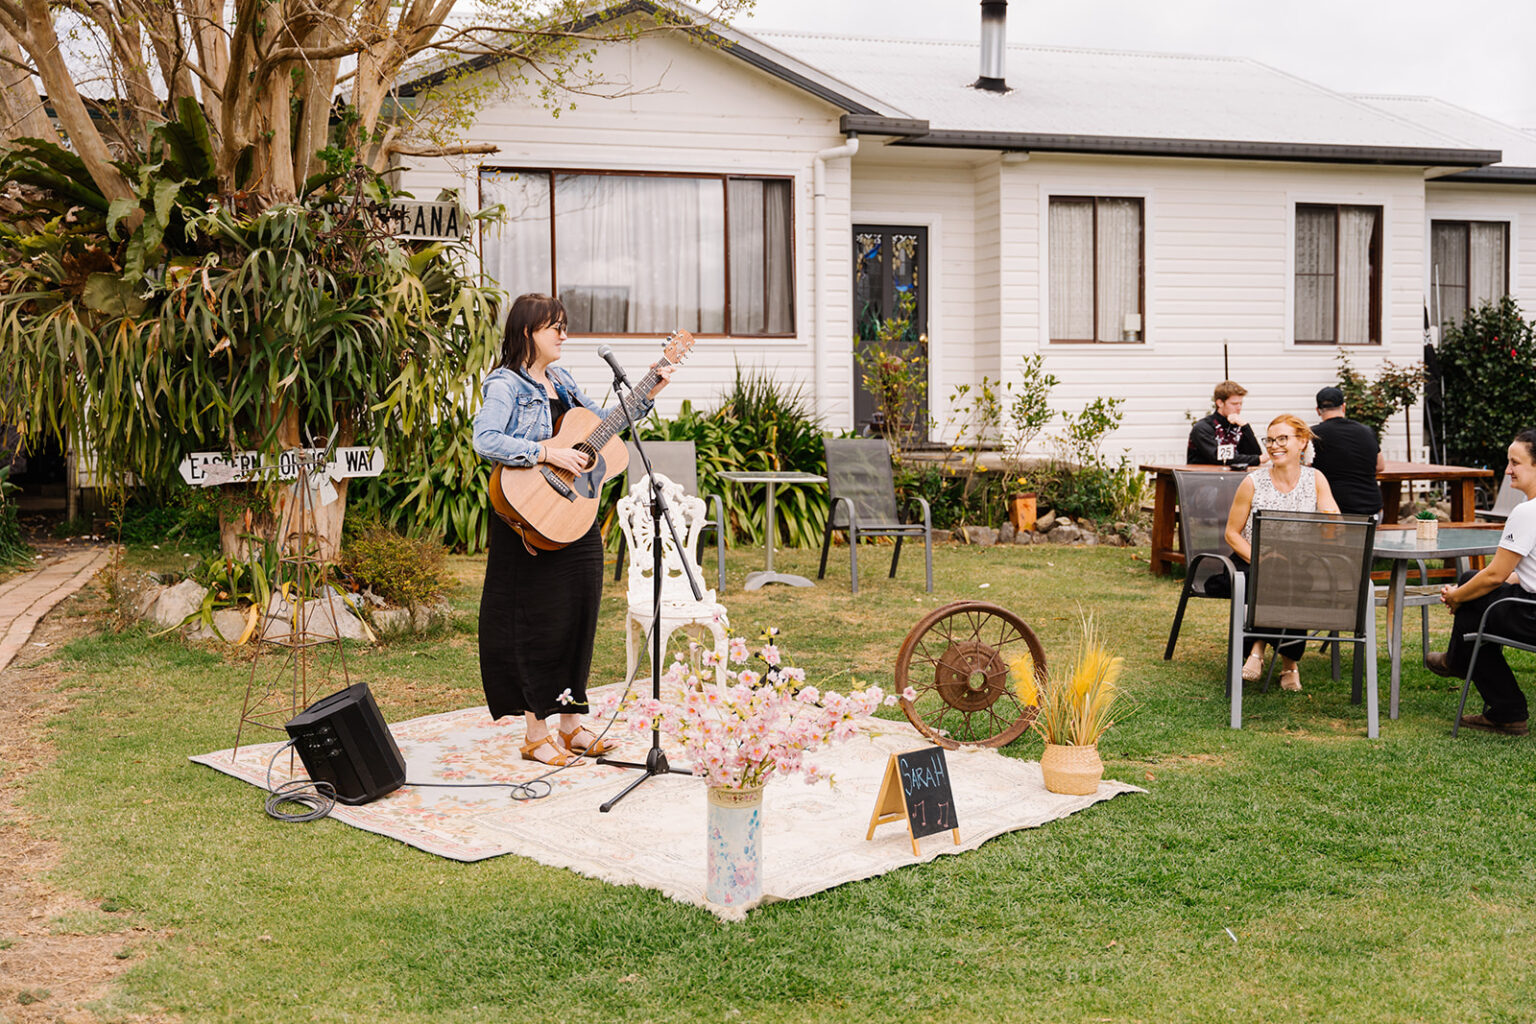 Music in the gardens at Cafe in the Valley